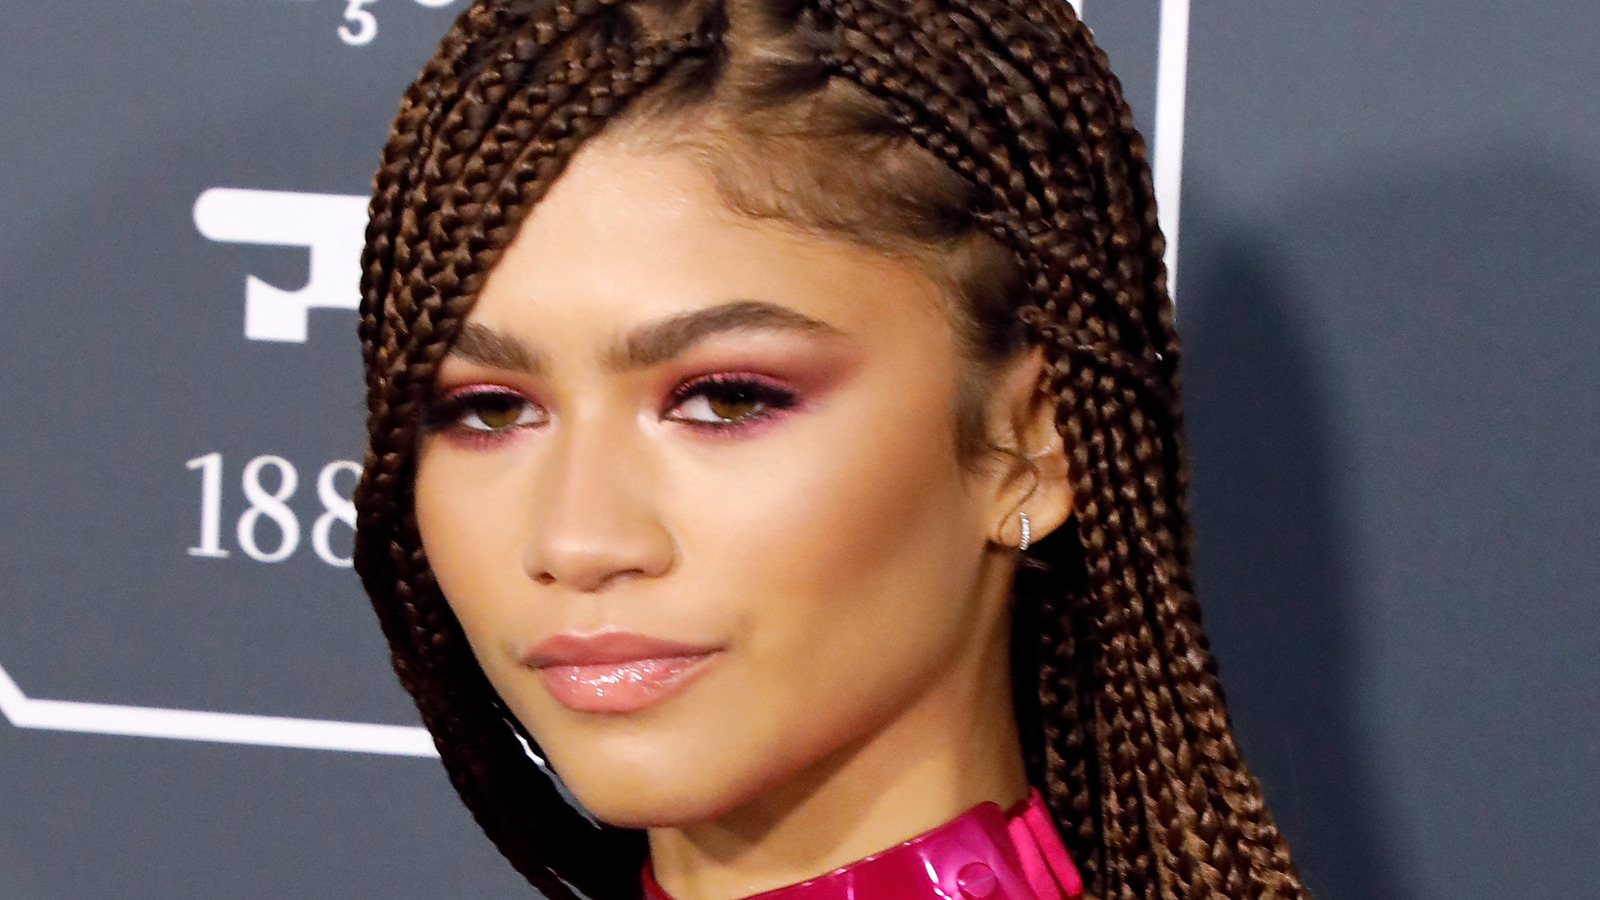 Knotless Braids Vs. Box Braids: Which Style Is Right For You?